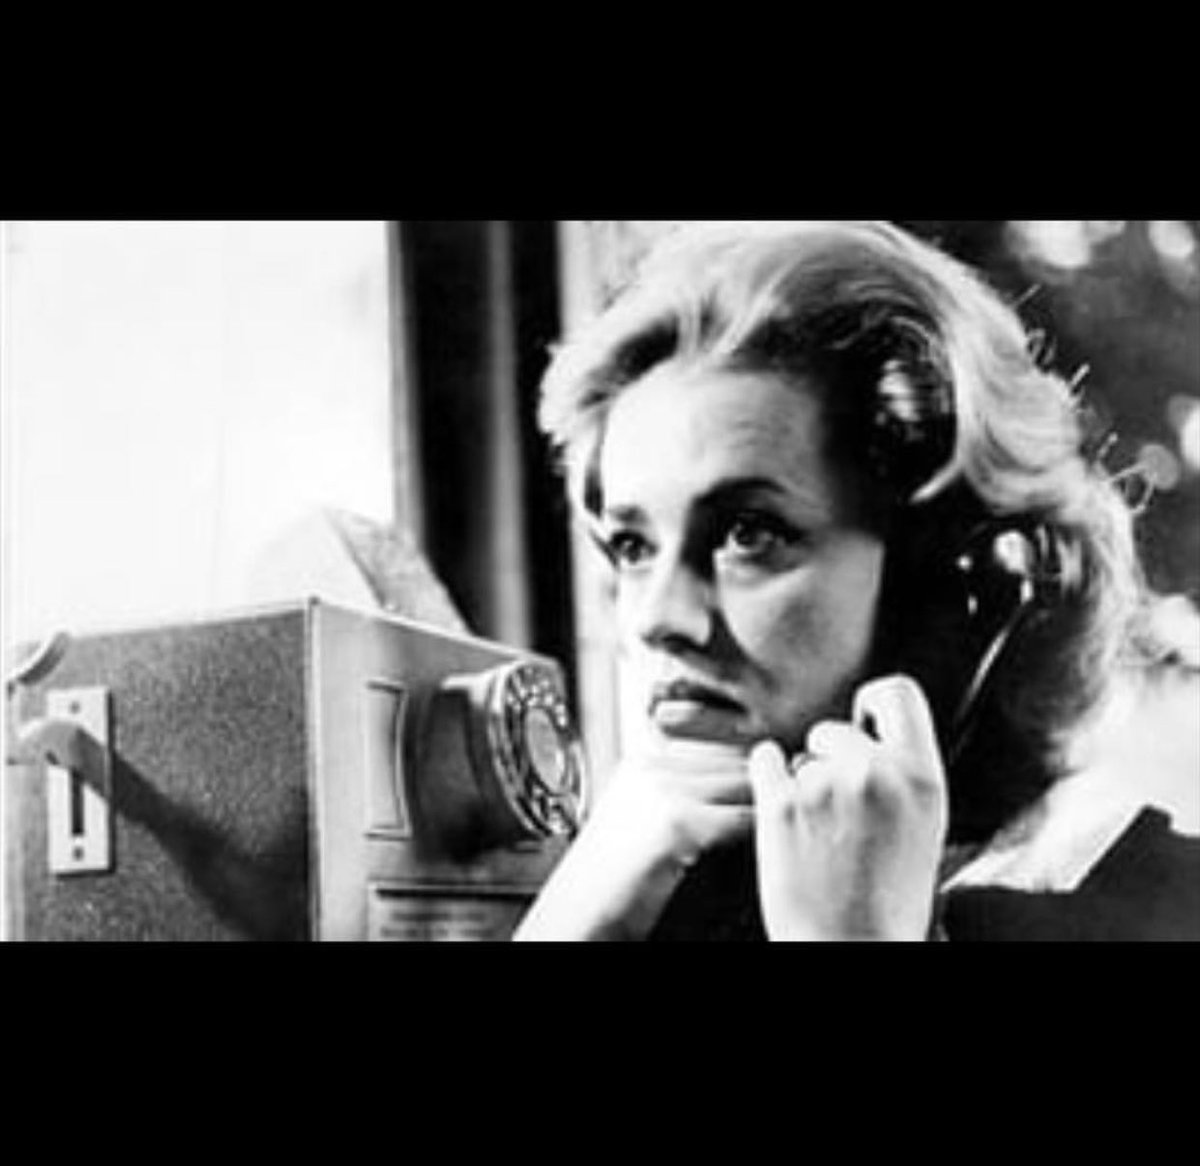 #another great #icon #jeannemoreau #legend #sirenofthescreen may you R.I.P ❤️???????? #YSL https://t.co/cXMnplB9Iy